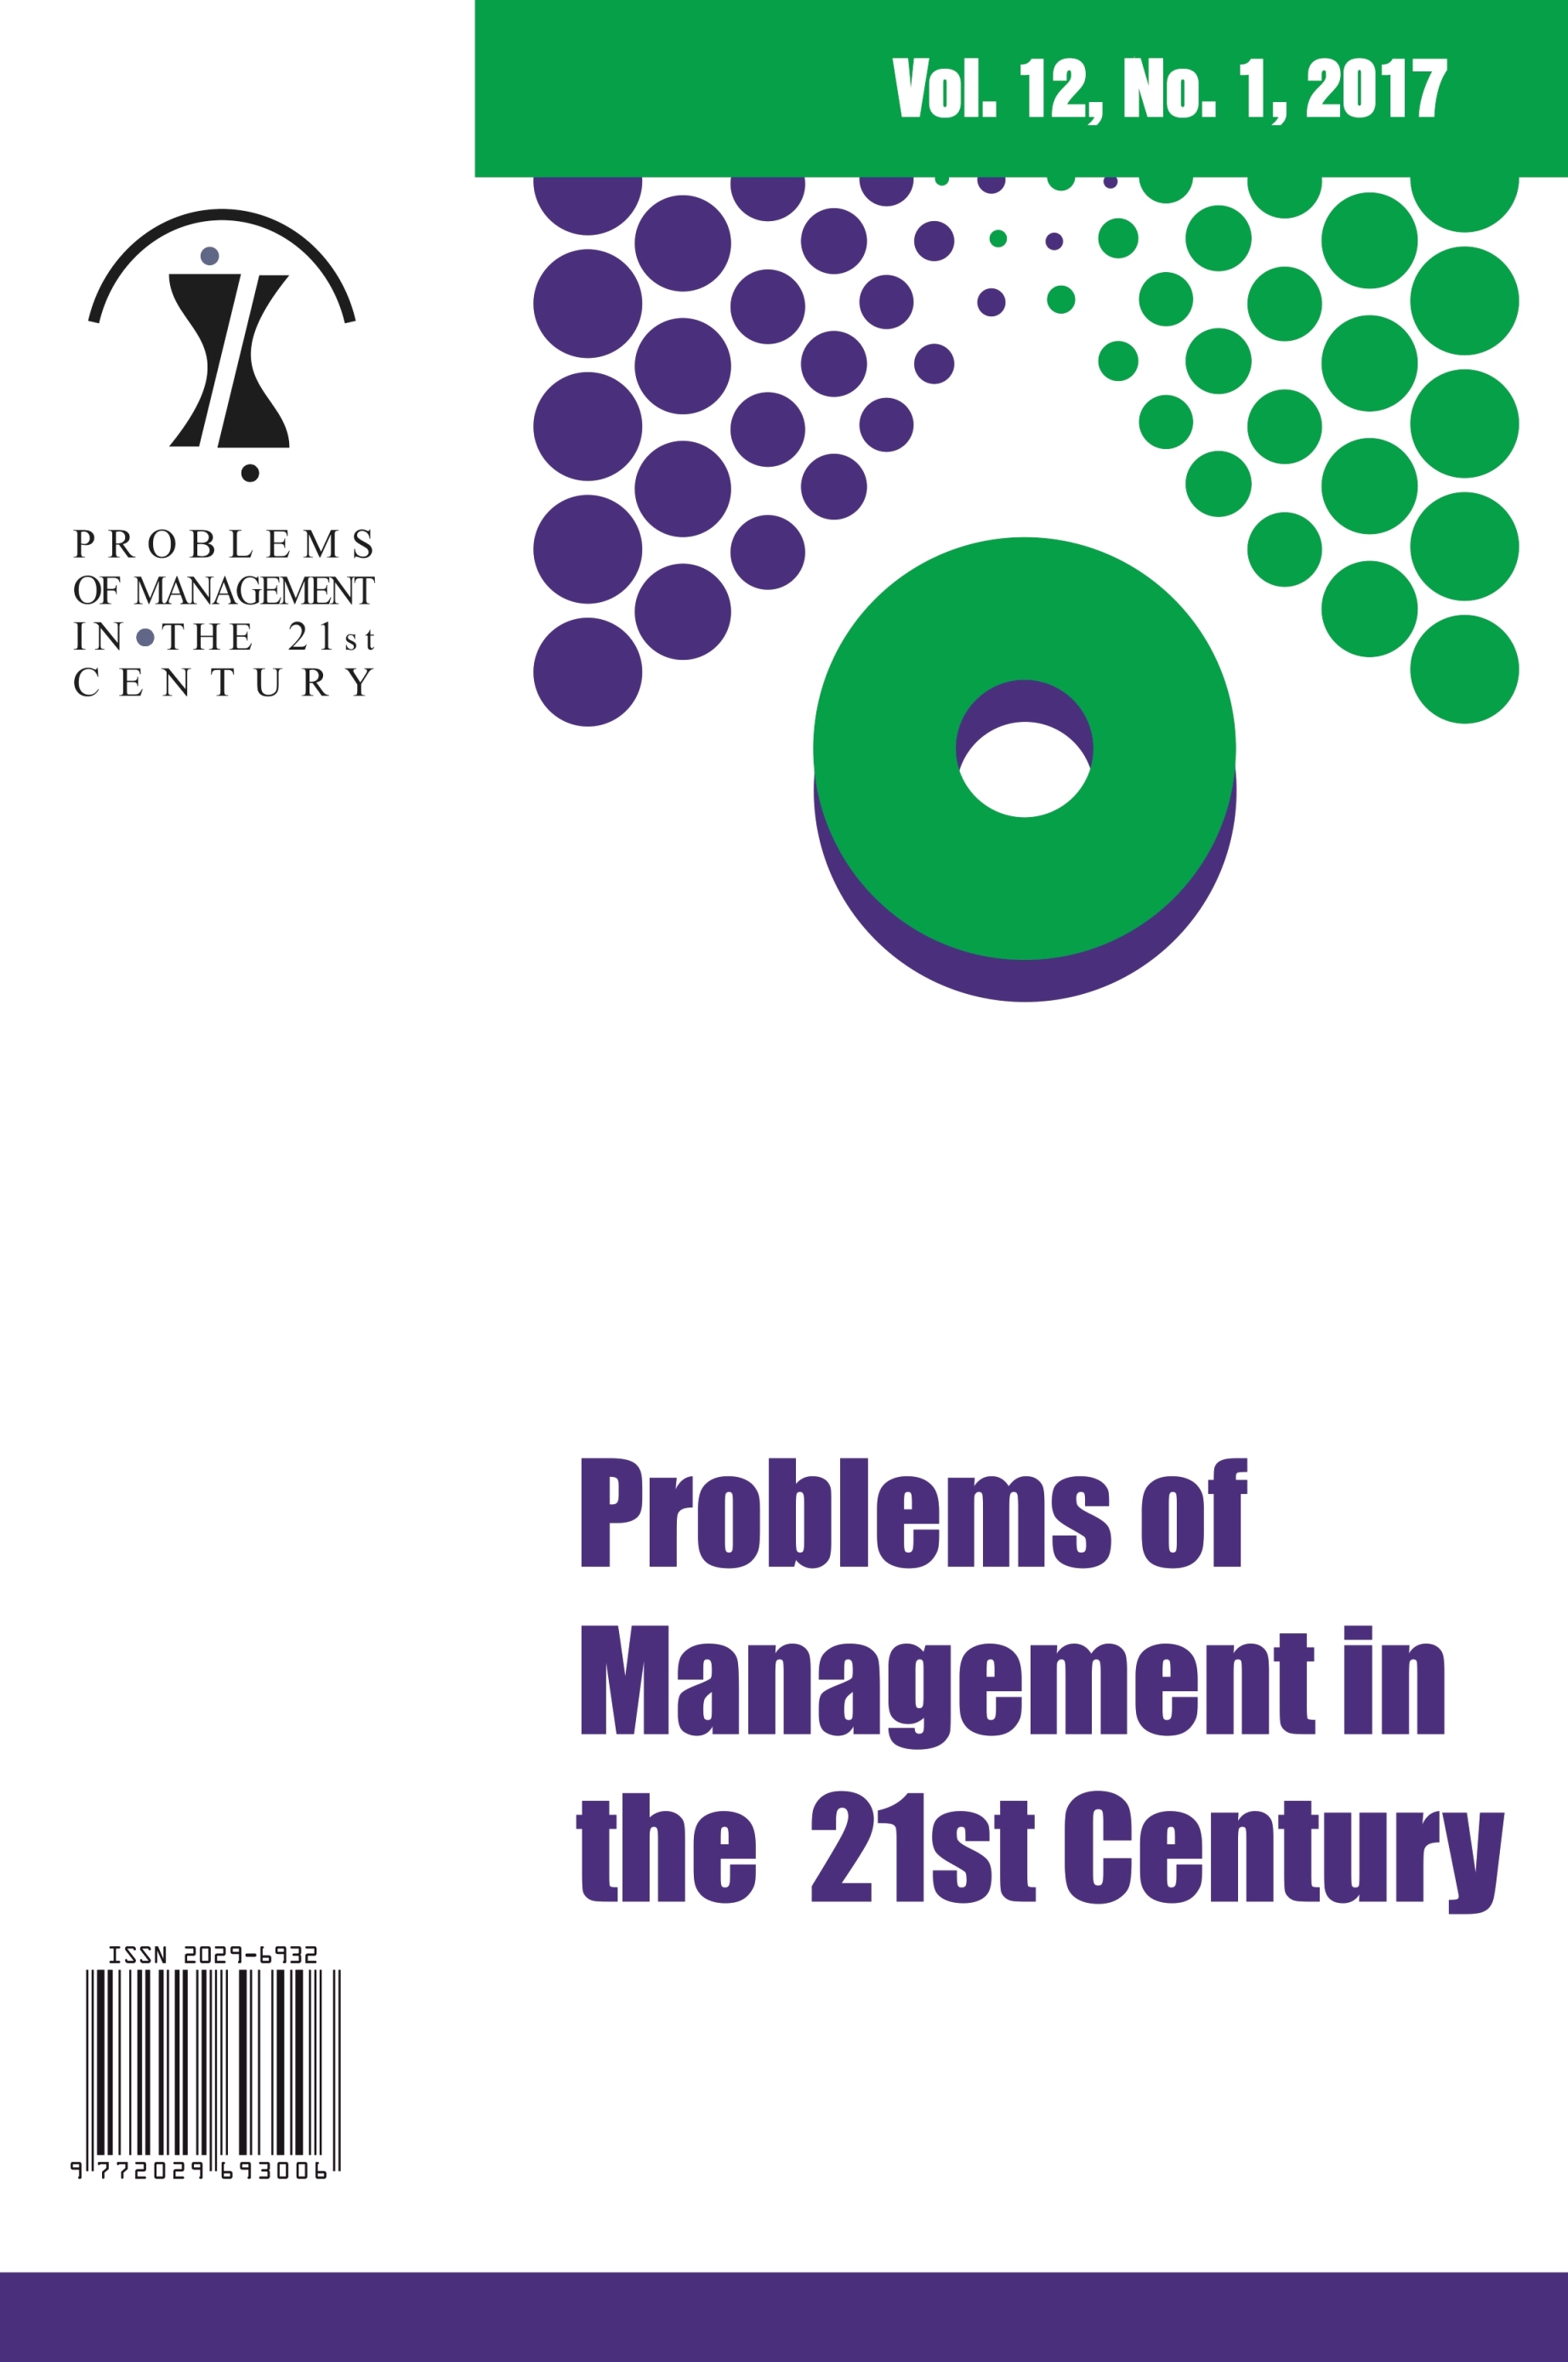 PERFORMANCE MEASUREMENT SYSTEMS IN THE CONTEXT OF NEW PUBLIC MANAGEMENT: EVIDENCE FROM AUSTRALIAN PUBLIC SECTOR AND POLICY IMPLICATIONS FOR DEVELOPING COUNTRIES